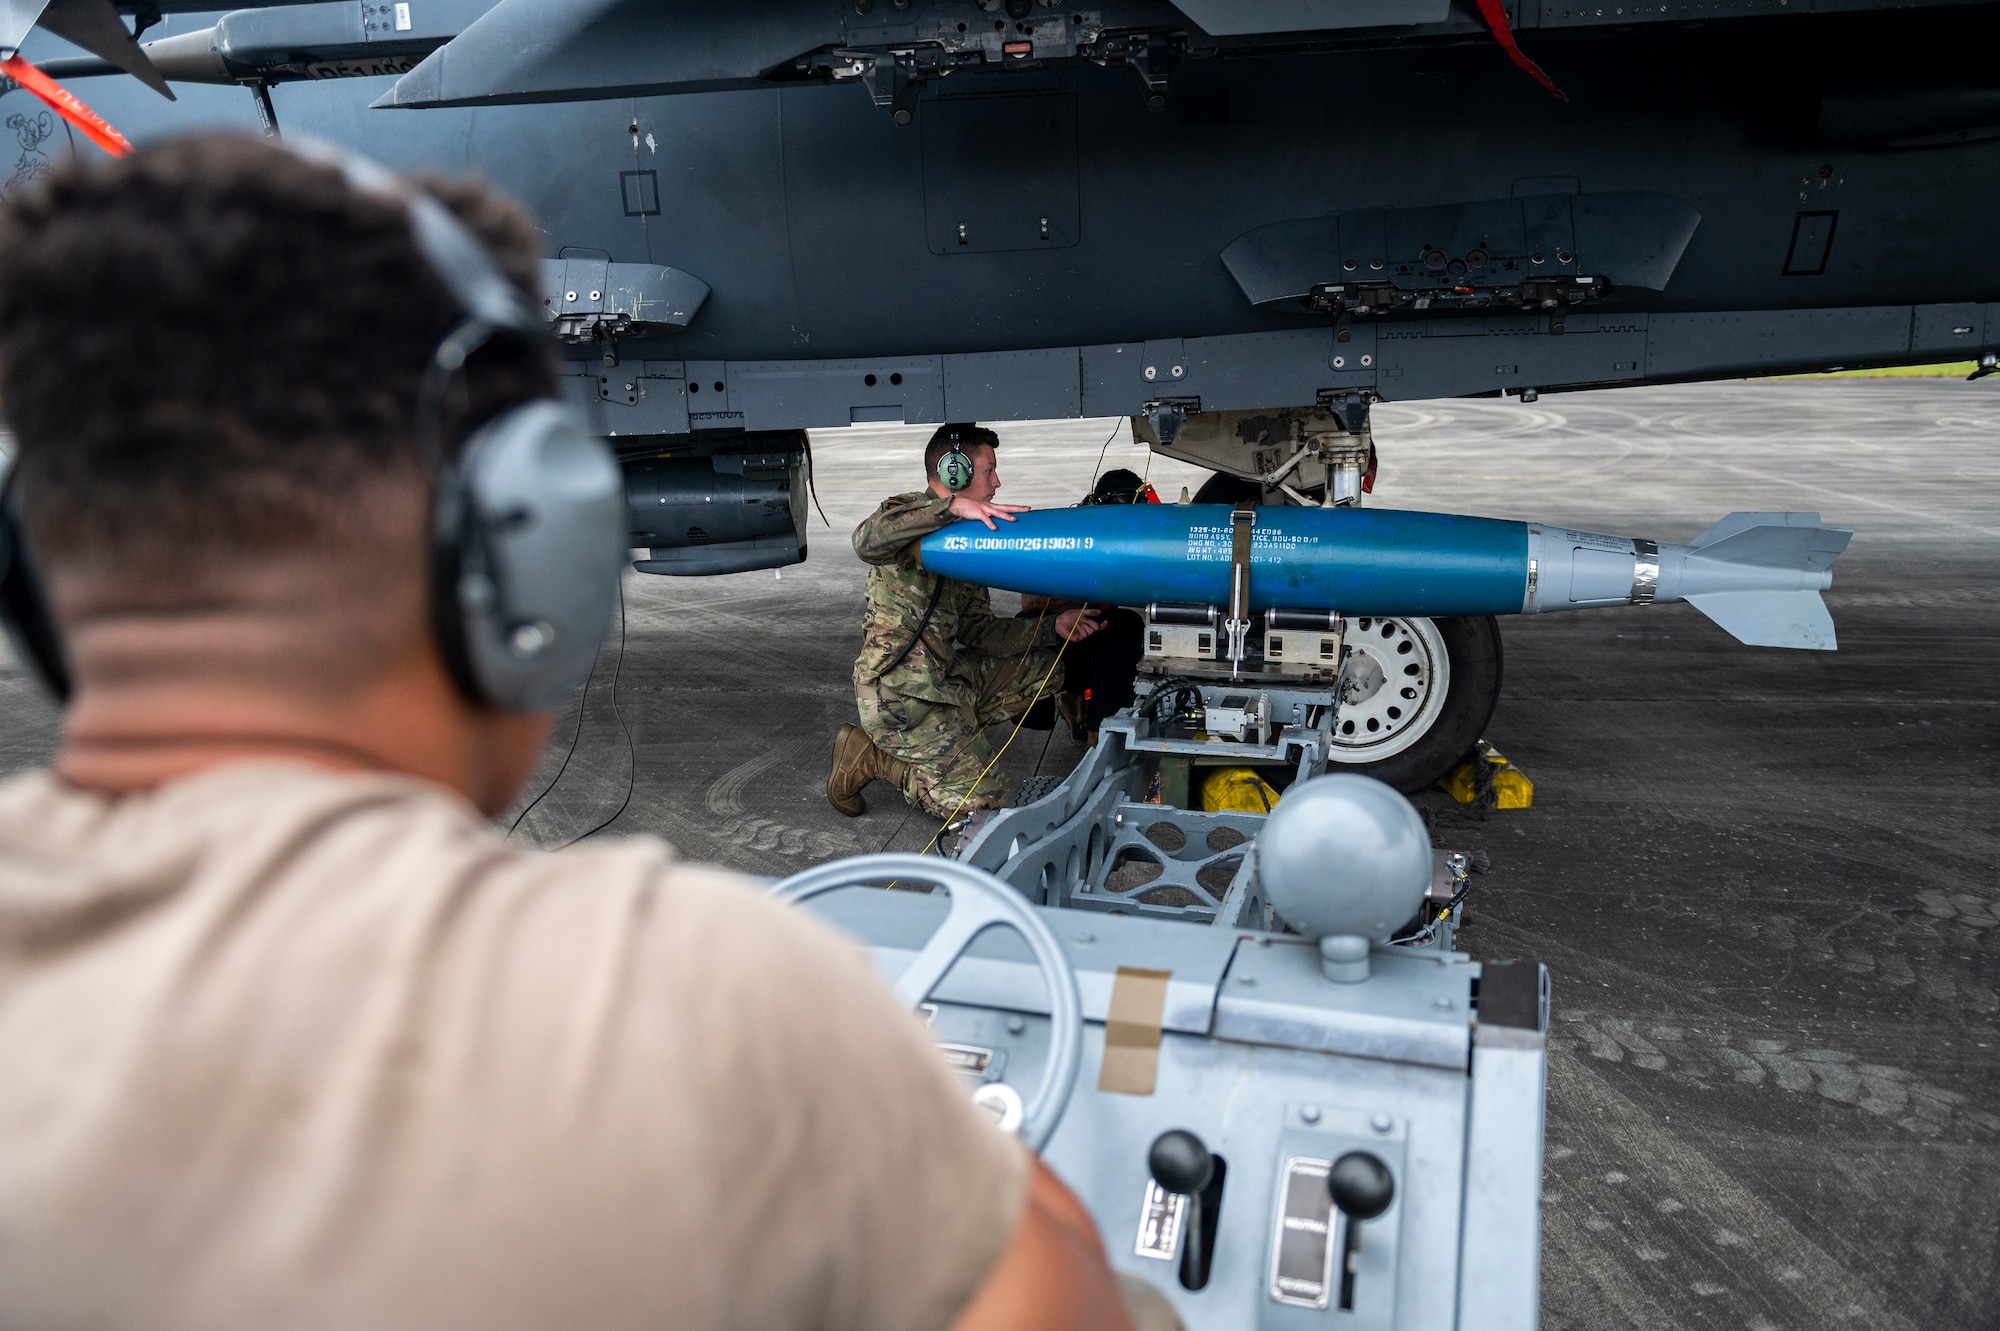 During the exercise, Airmen from the 4th Fighter Wing were able to refuel two F-15Es ensuring the fighters were ready to rapidly deploy.